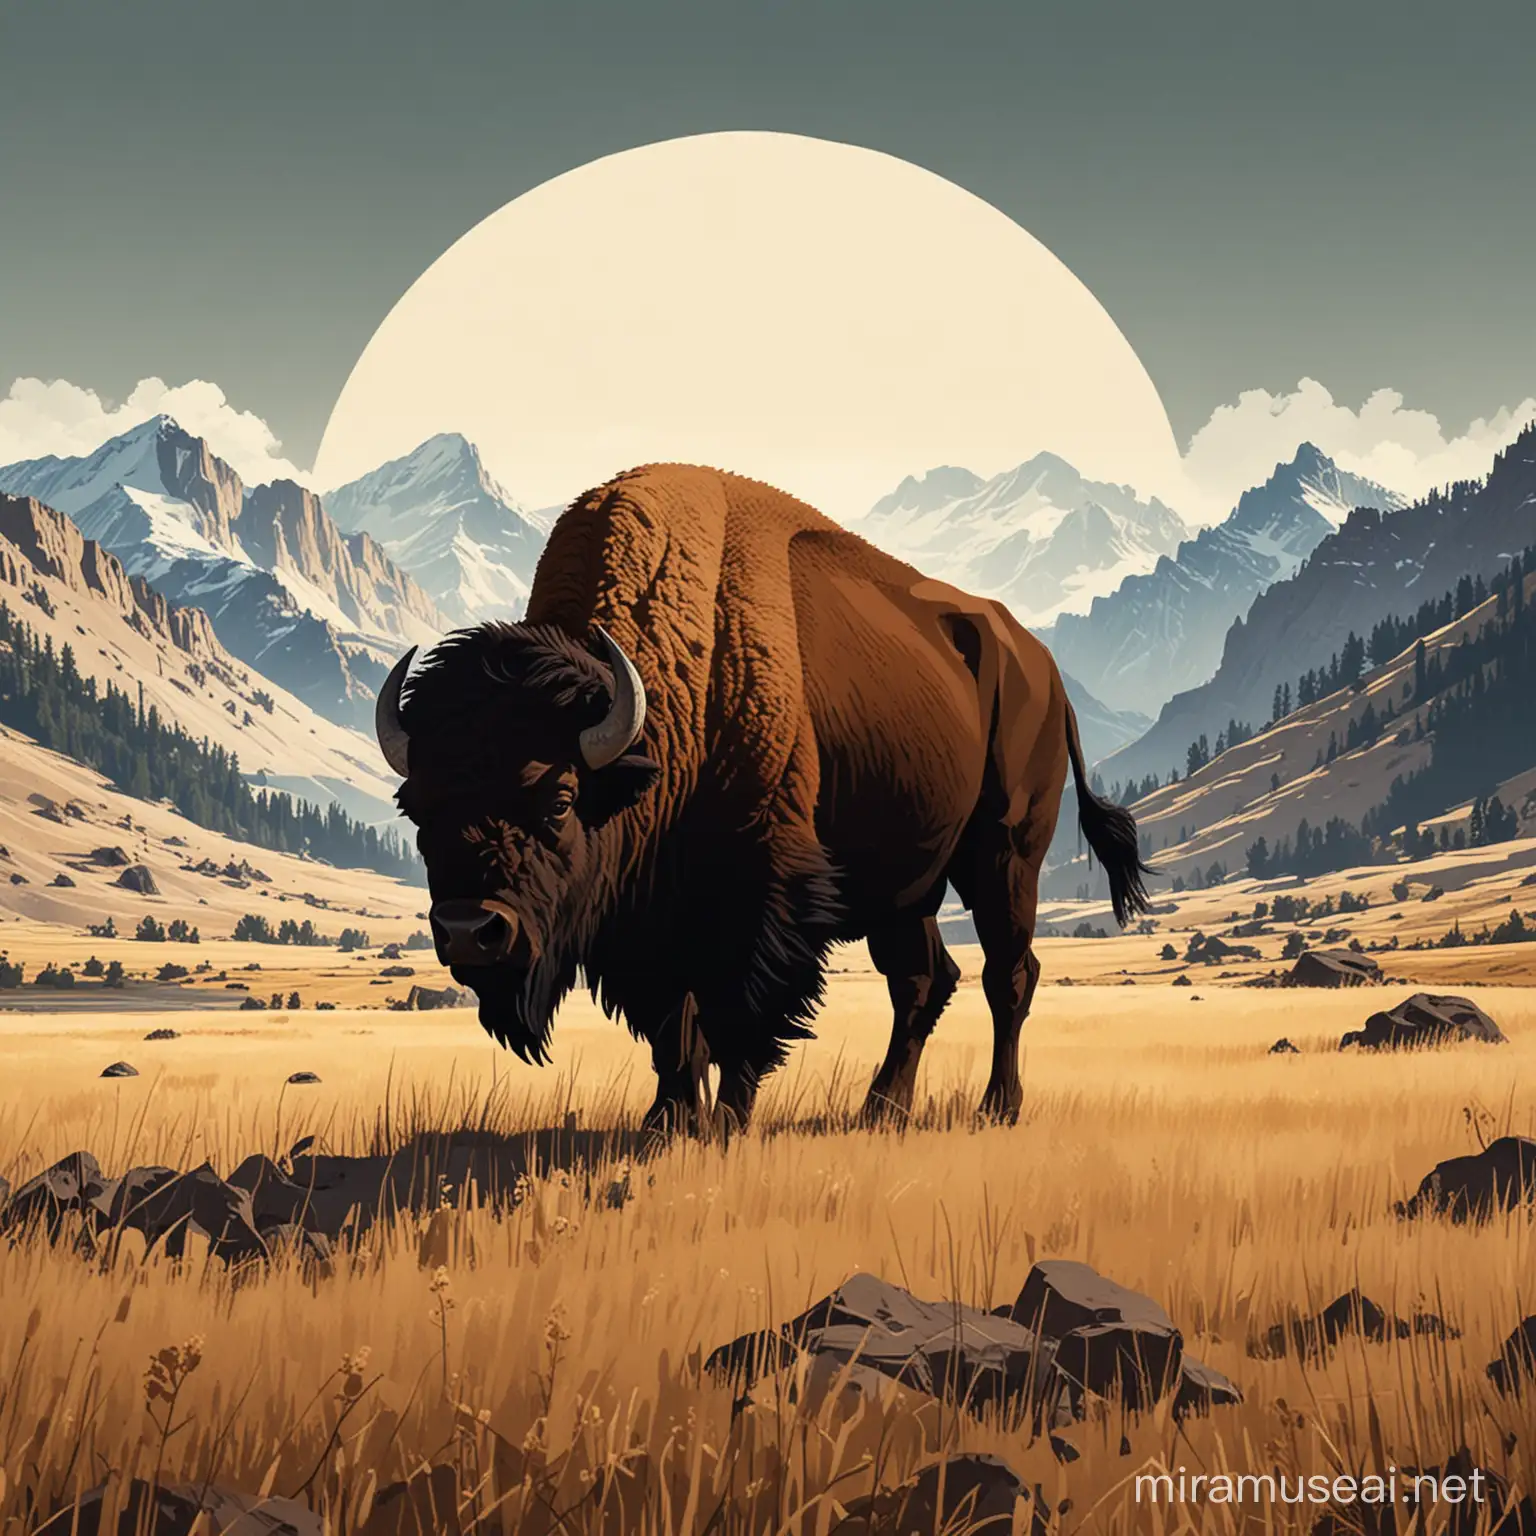 Logo for Law firm called "Yellowstone Law"

Prompt 1:
Description: A majestic bison silhouette against a backdrop of rugged mountains.
Keywords: Bison, strength, mountains, nature, resilience.
Style: Minimalistic, sleek lines.
Media: Digital illustration.
Reference Artist: Charley Harper.